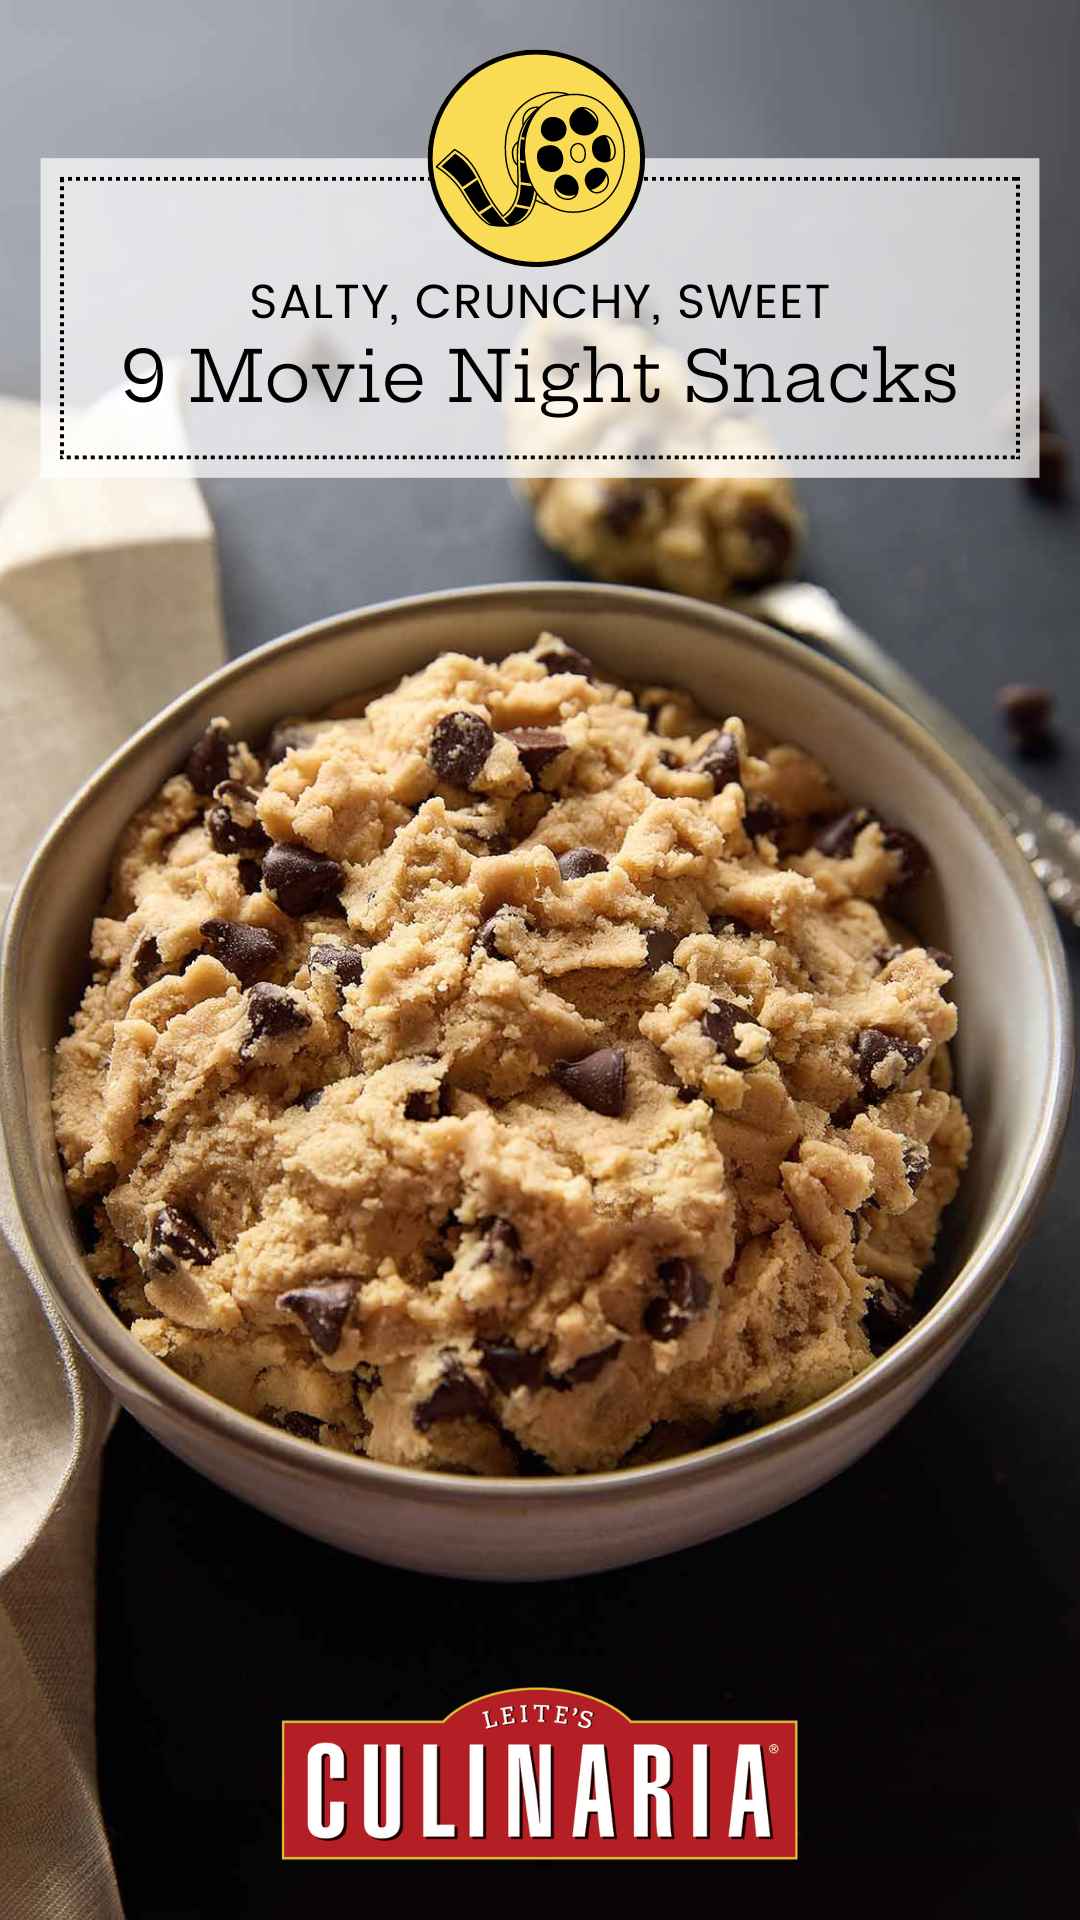 A bowl of edible chocolate chip cookie dough.